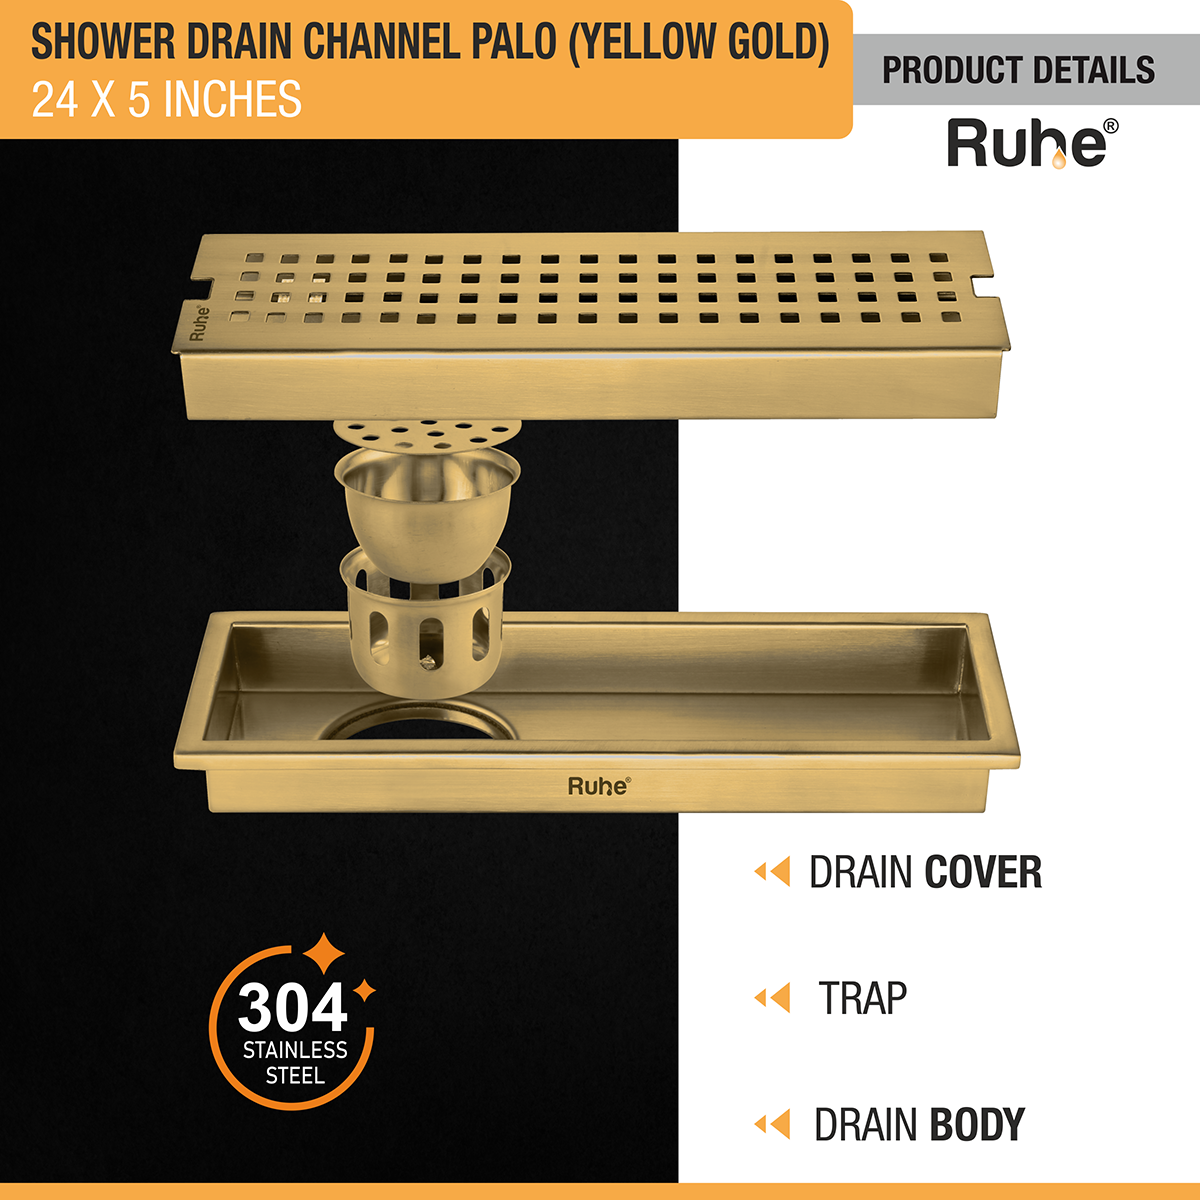 Palo Shower Drain Channel (24 x 5 Inches) YELLOW GOLD product details